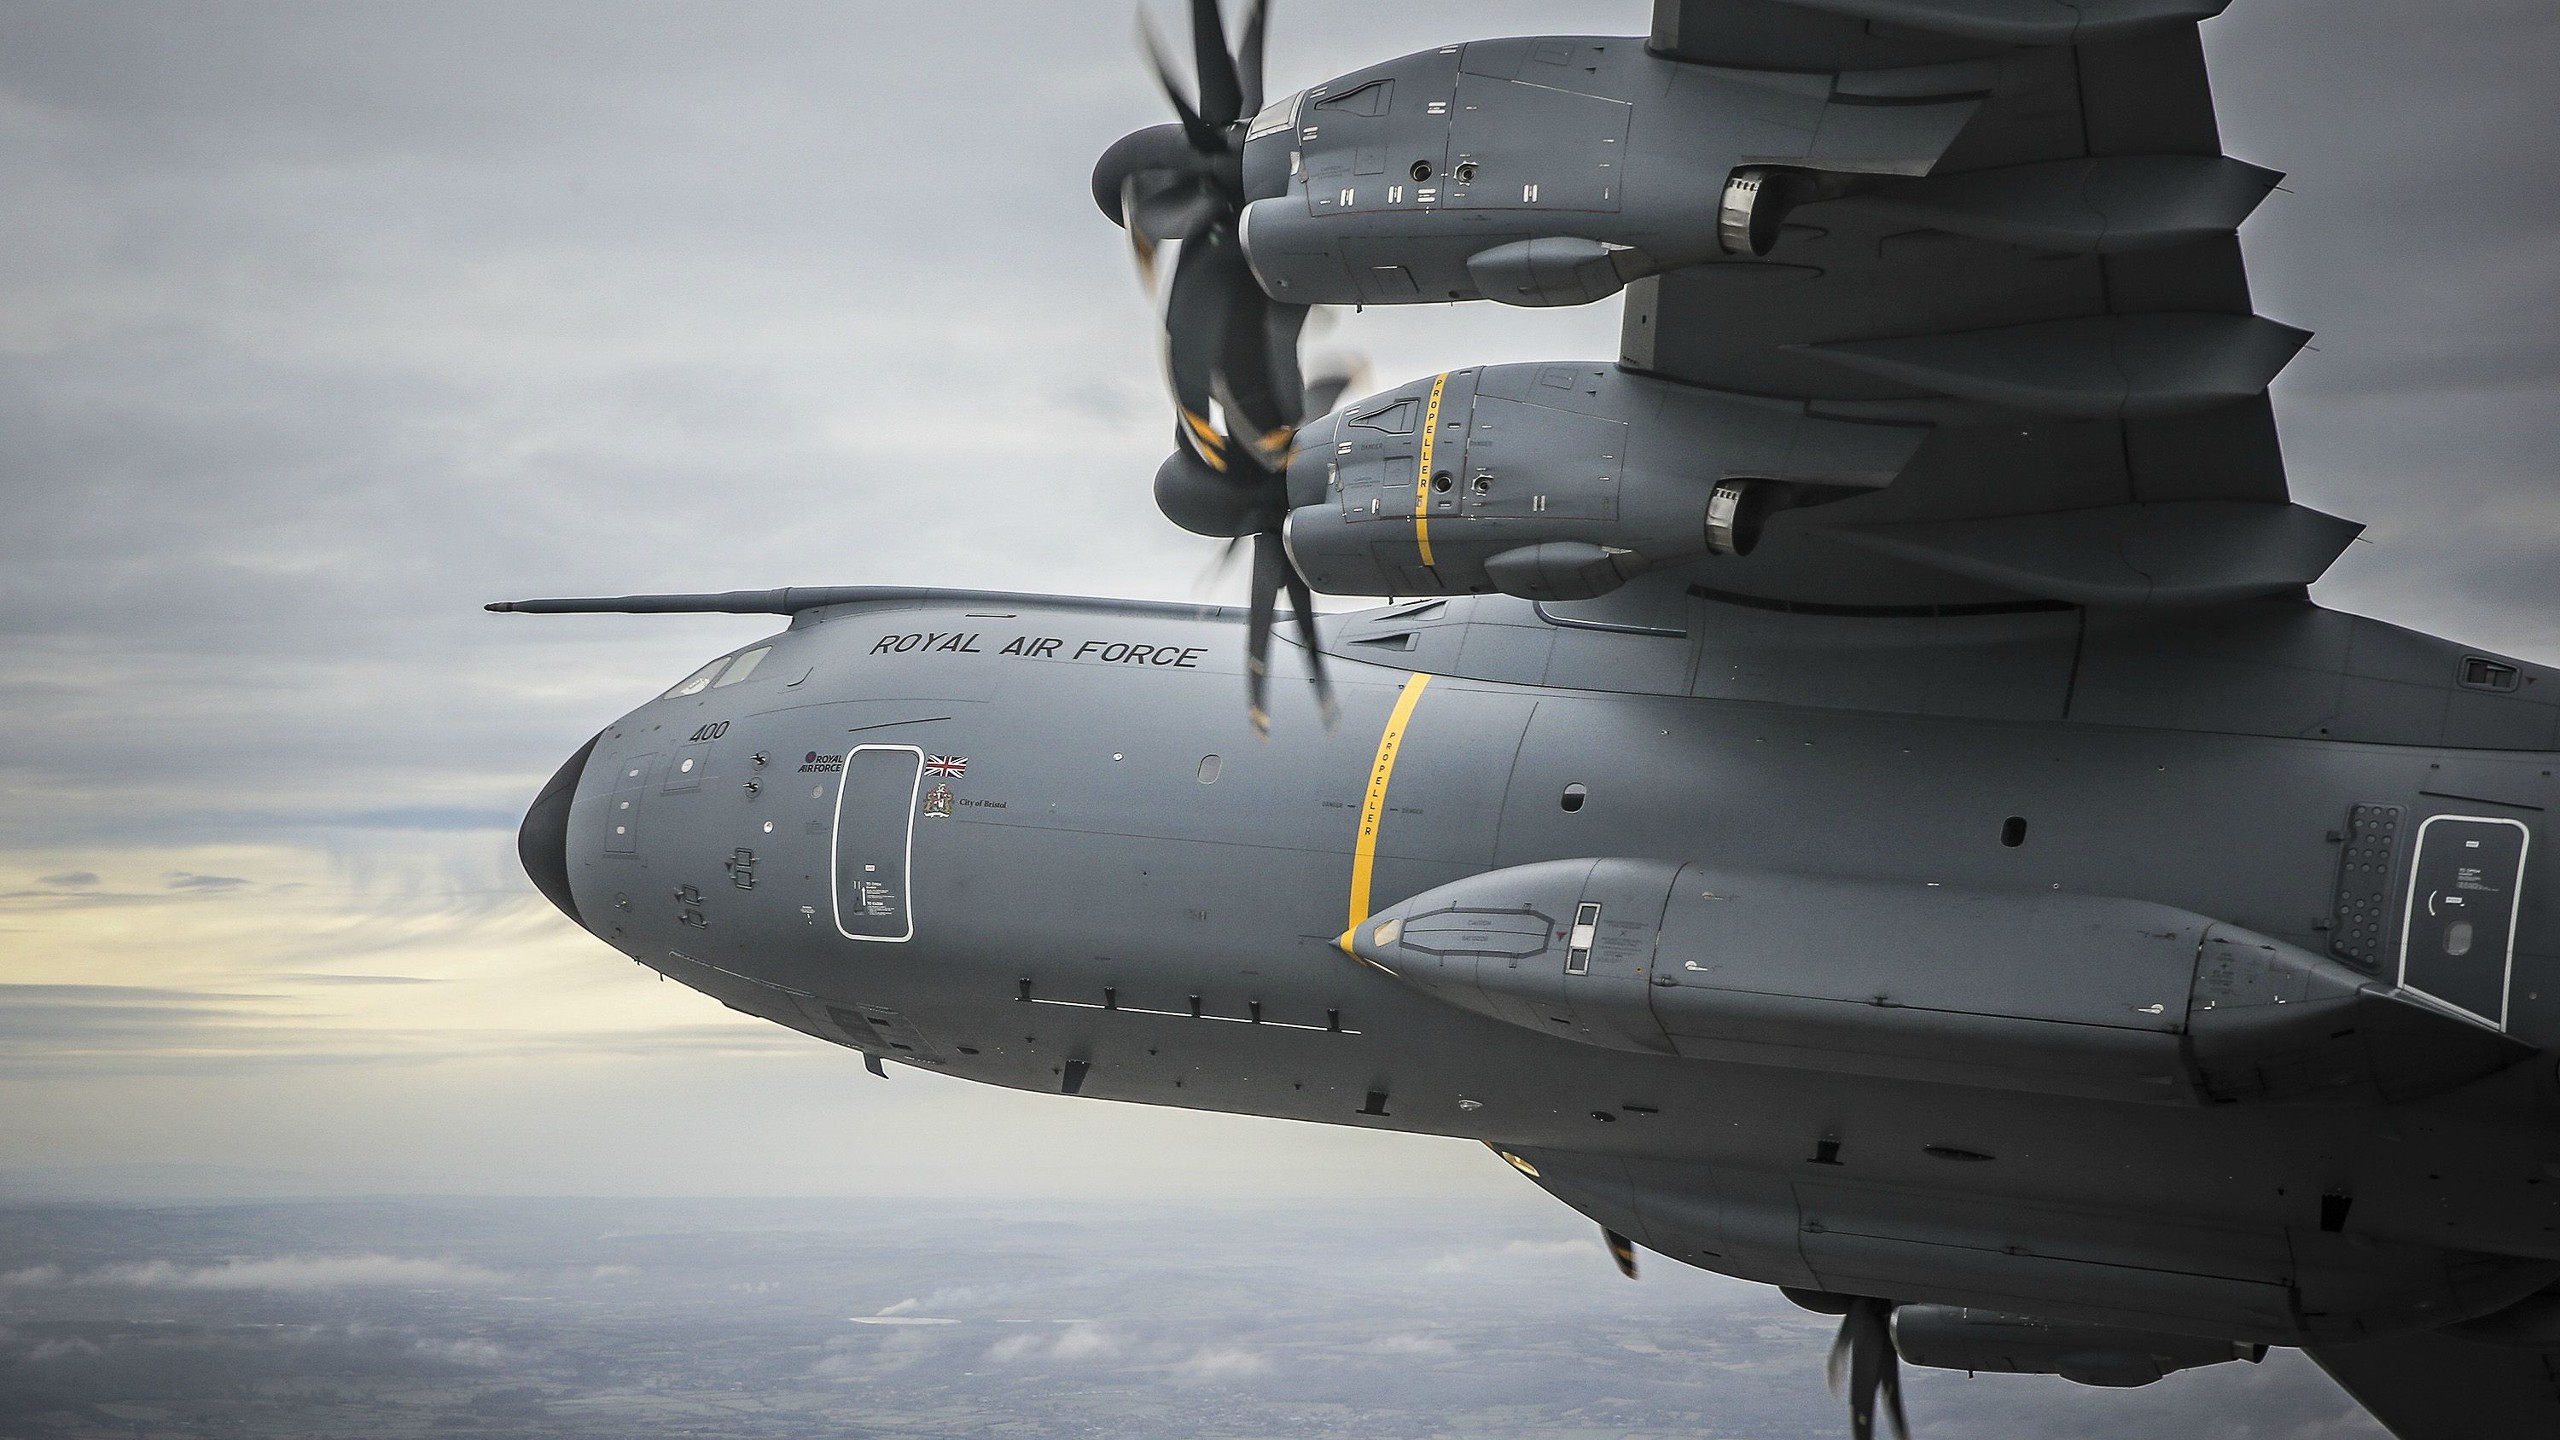 General 2560x1440 military Airbus A400M Atlas military aircraft aircraft vehicle numbers Royal Air Force propeller Airbus french aircraft